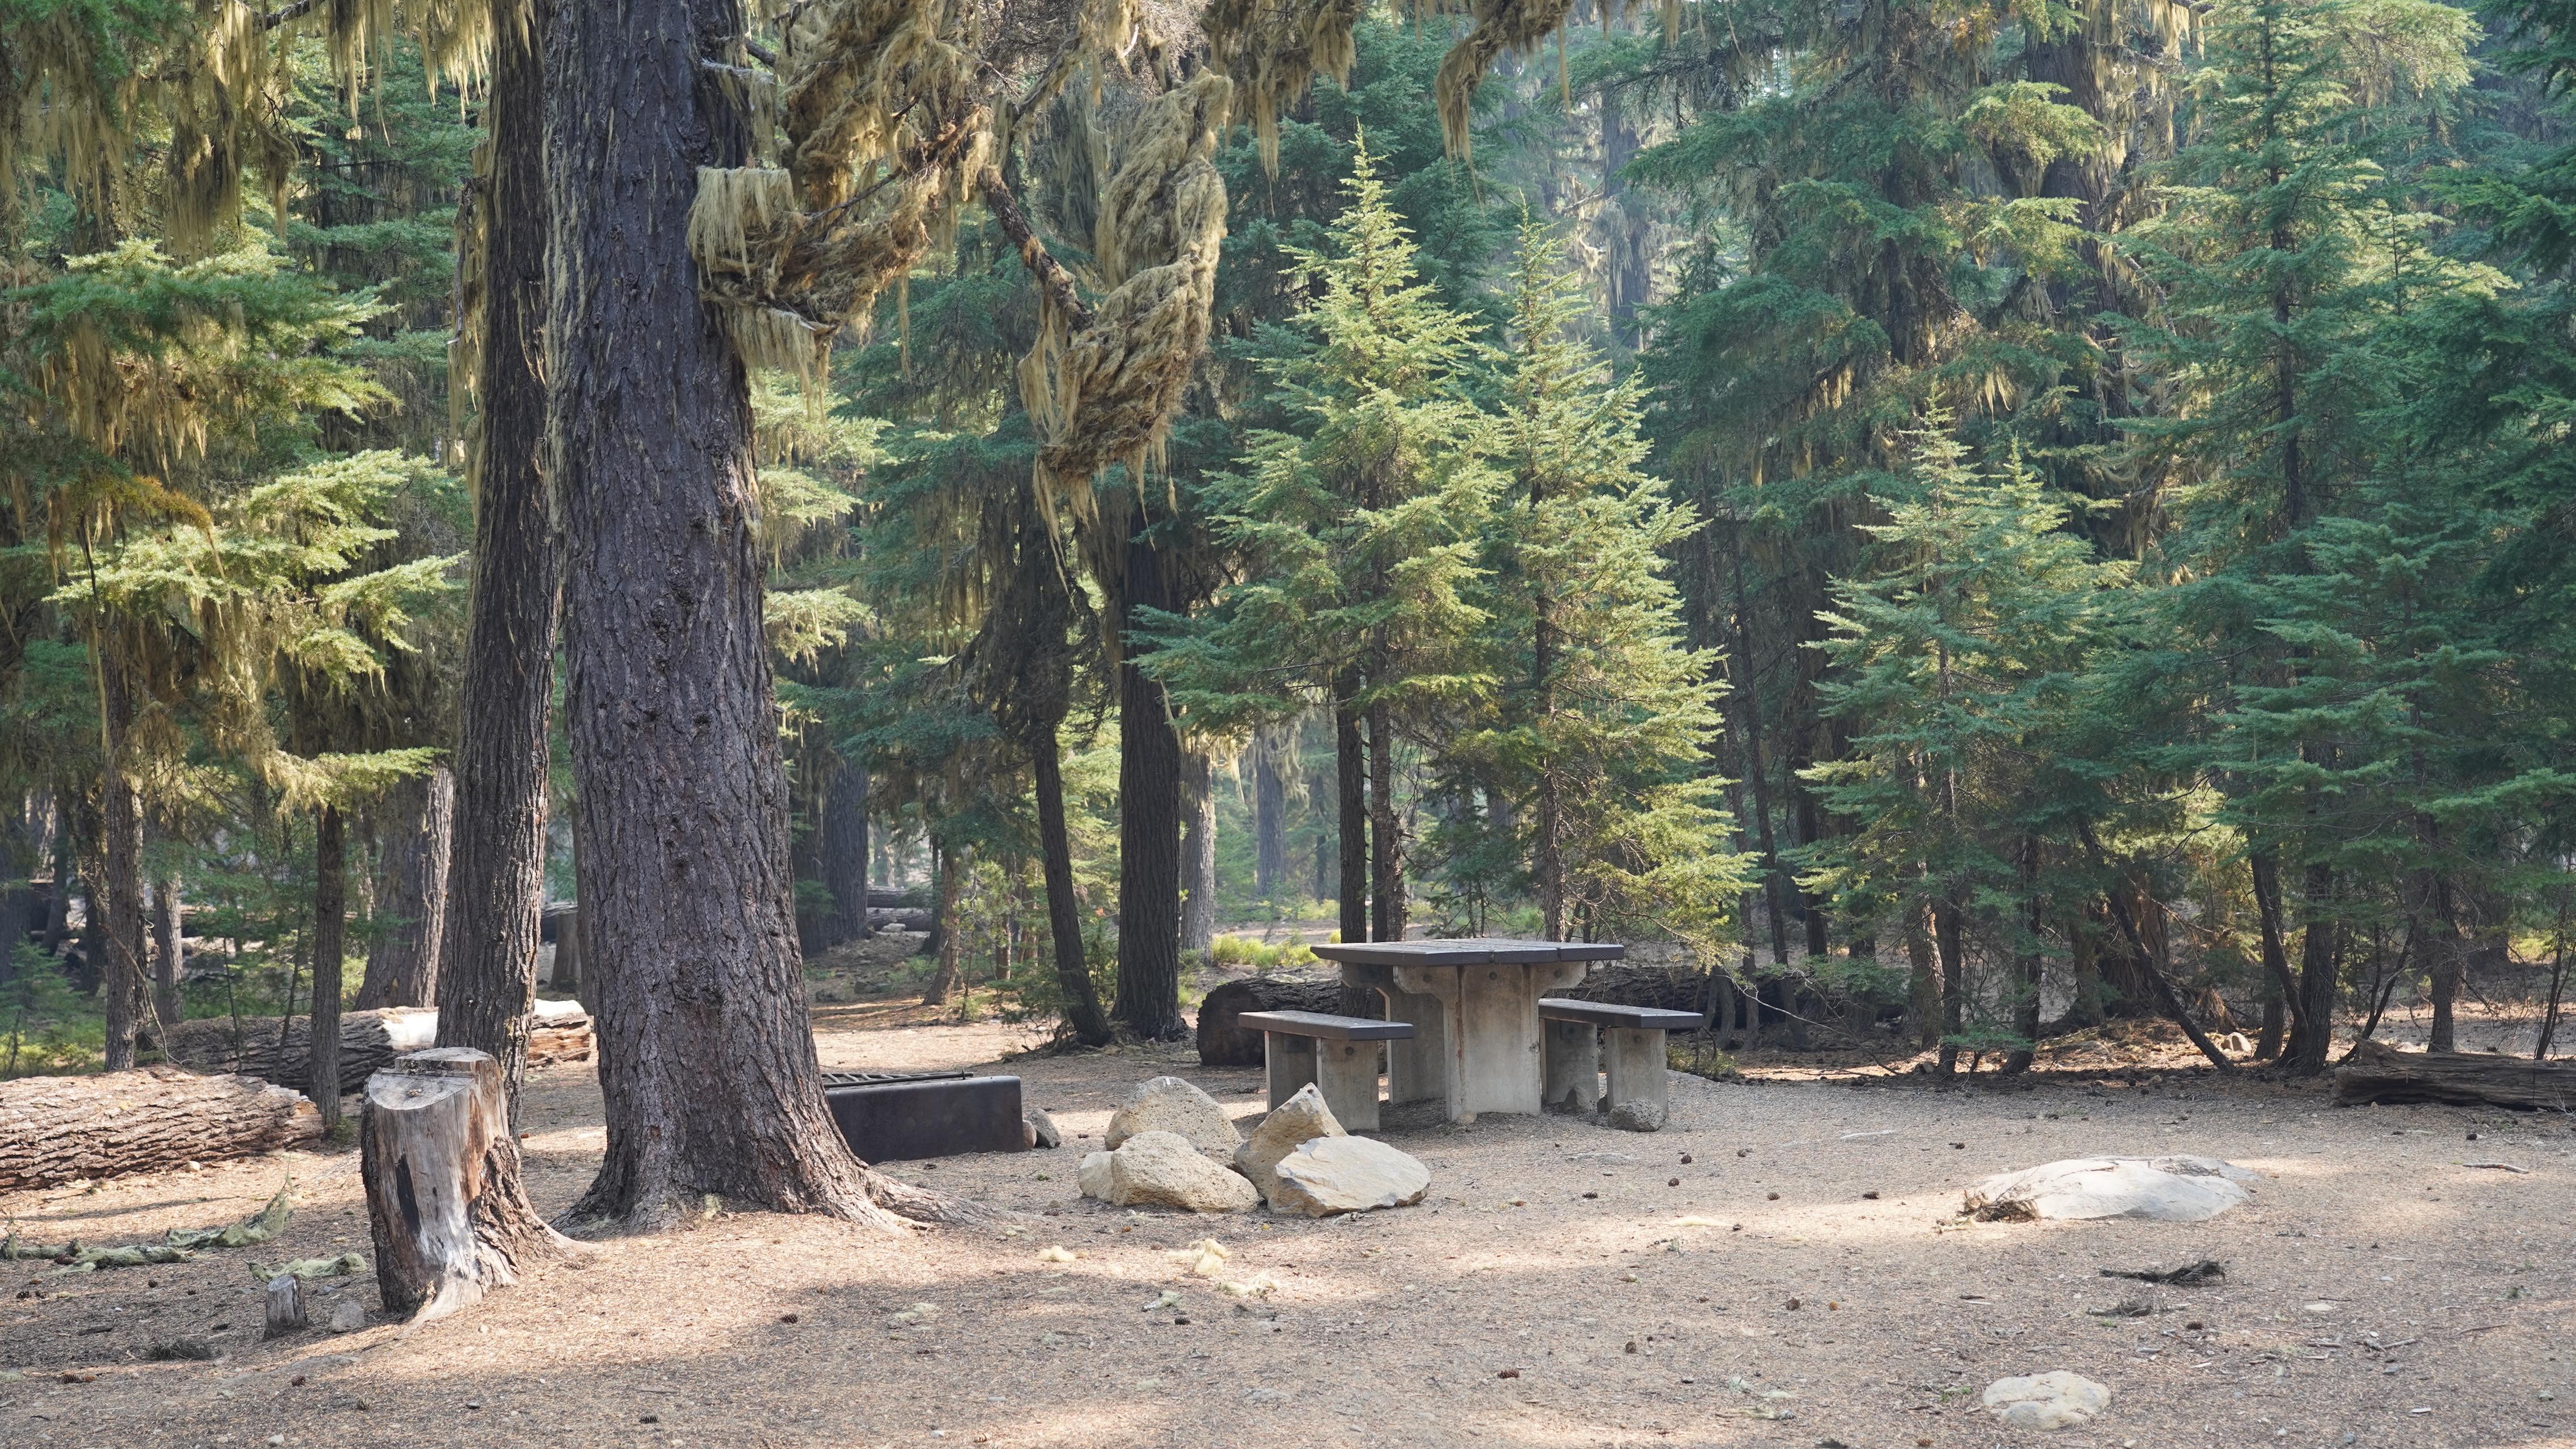 A picnic table and fire pit are surrounded by green hemlock and fir trees at North Waldo Campground